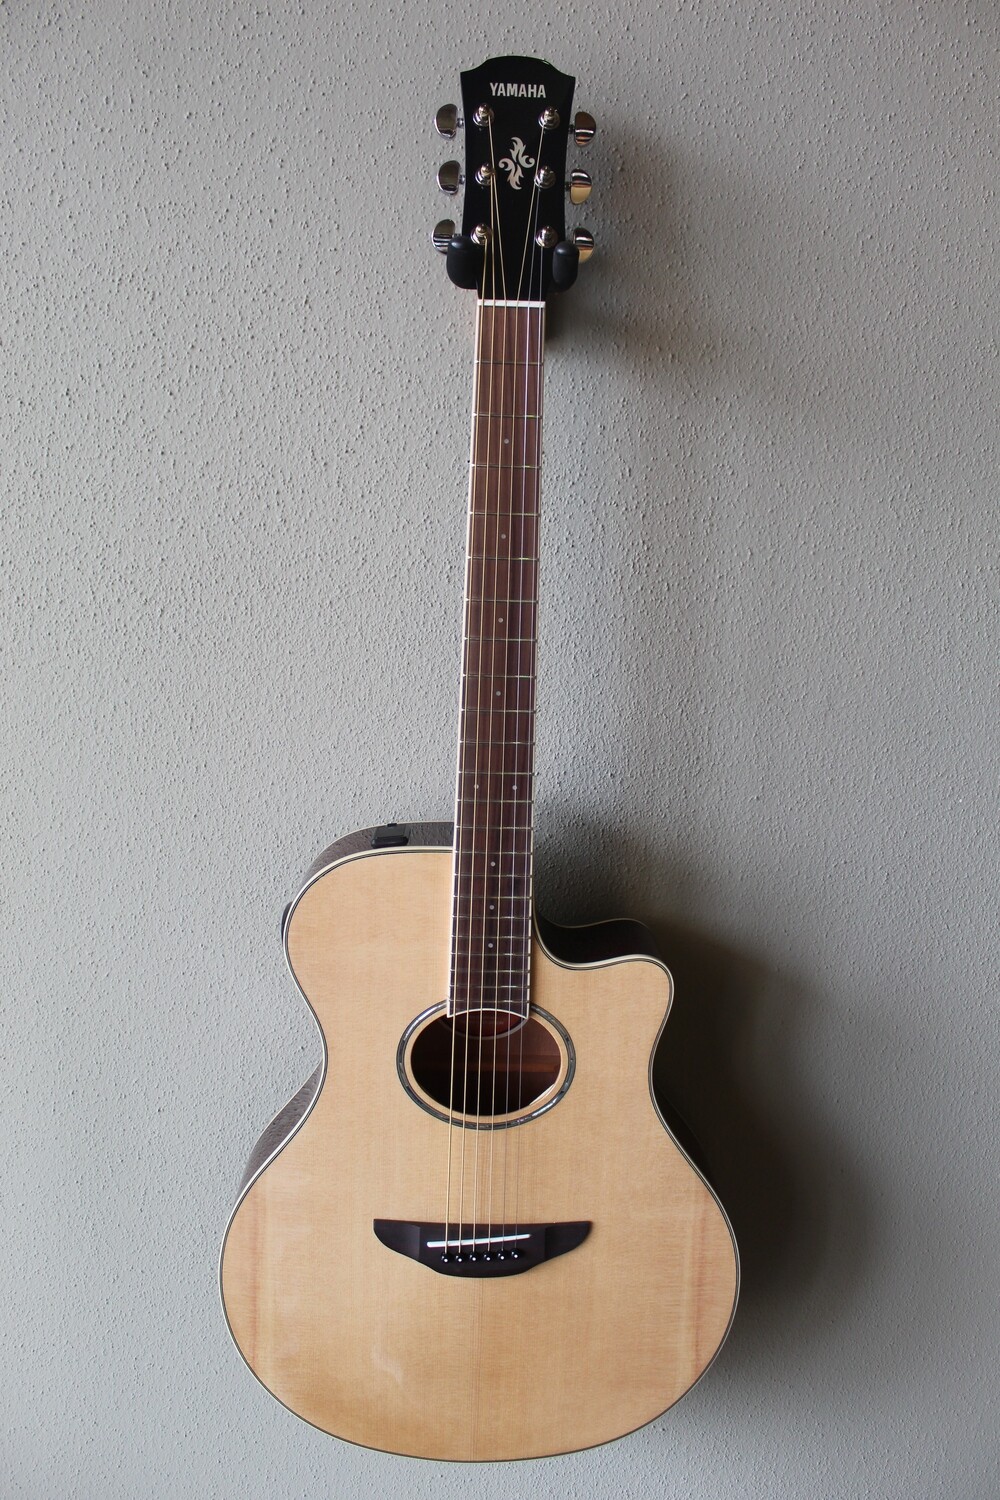 Yamaha APX600 Acoustic/Electric Guitar with Gig Bag - Natural